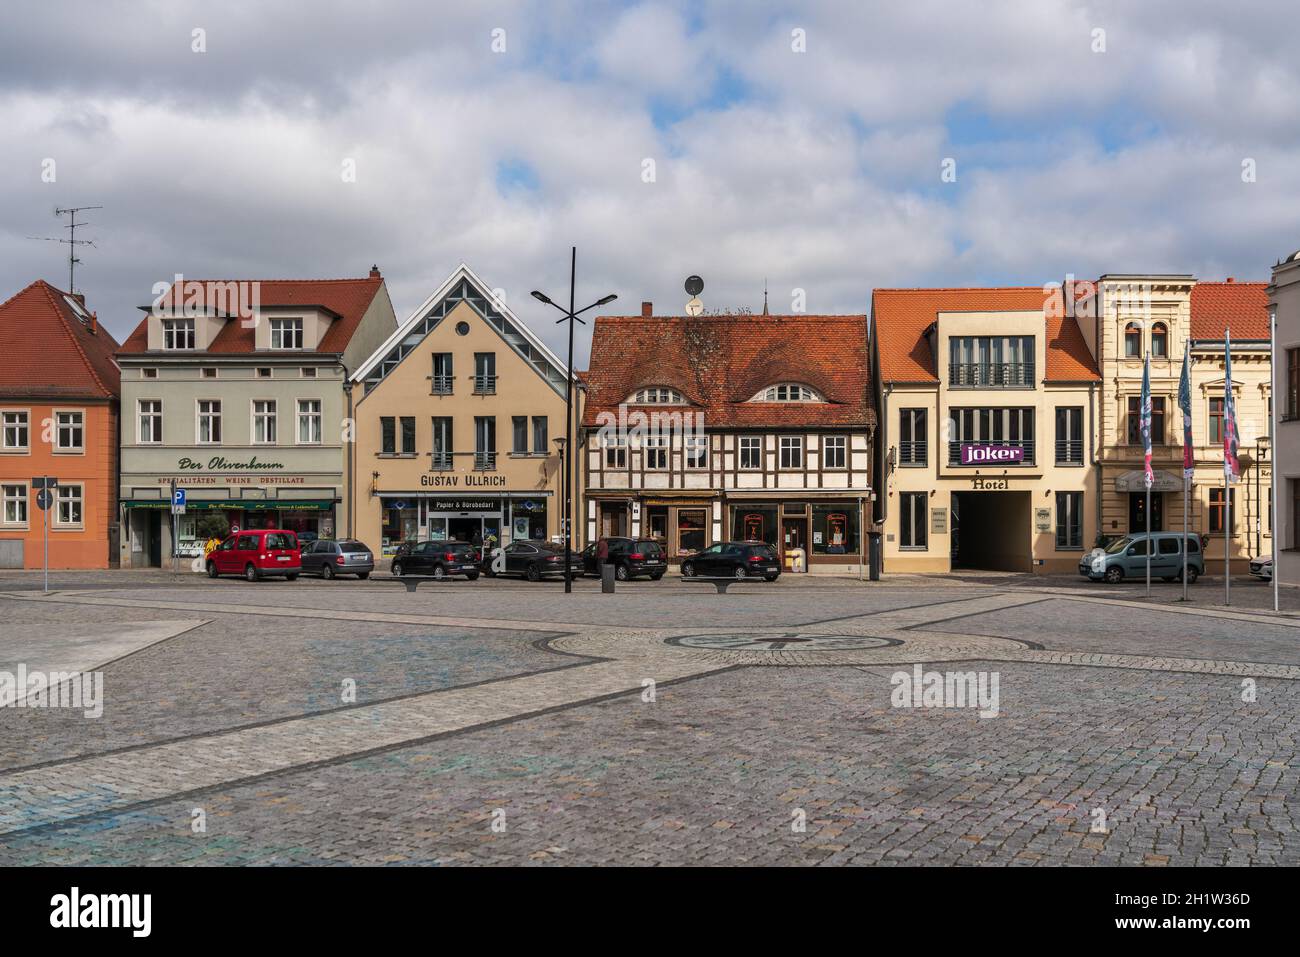 STENDAL, GERMANY - APRIL 24, 2021: Houses and buildings on the streets in the old town. Hansestadt Stendal is a medieval town in Saxony-Anhalt state. Stock Photo